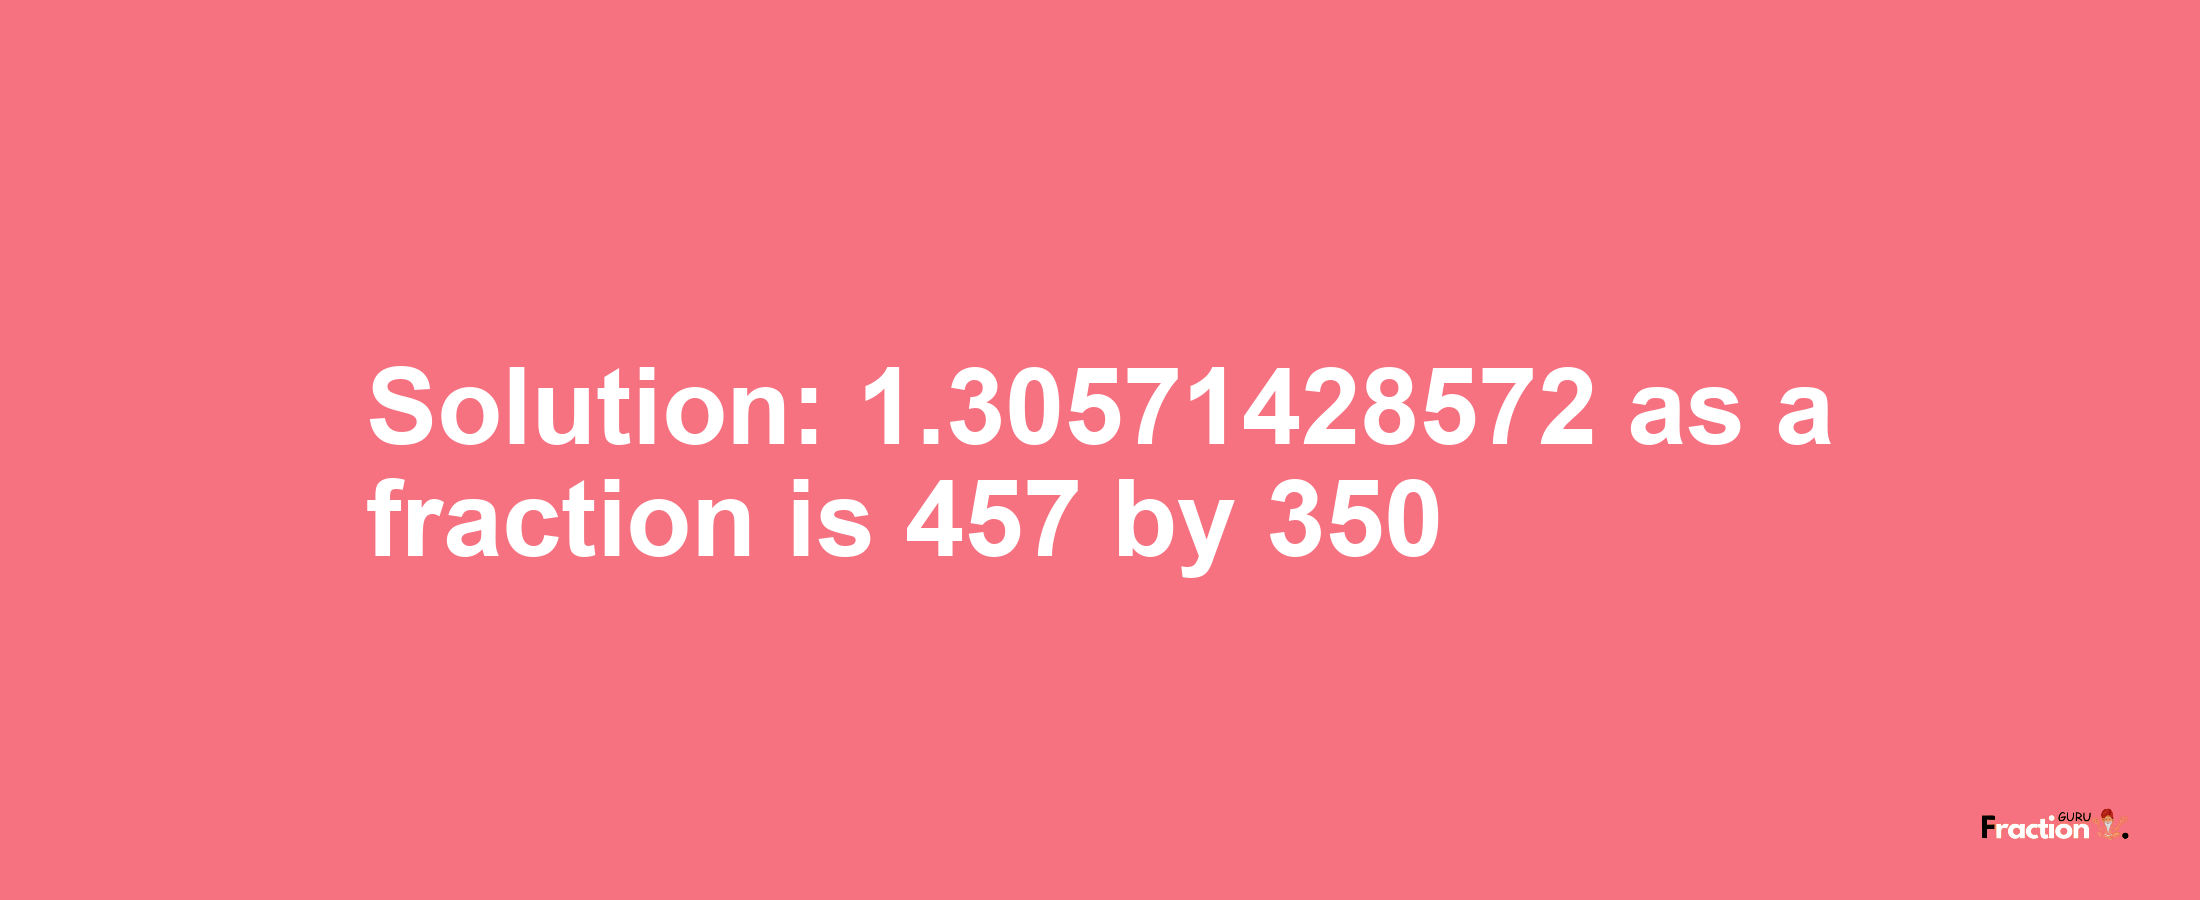 Solution:1.30571428572 as a fraction is 457/350